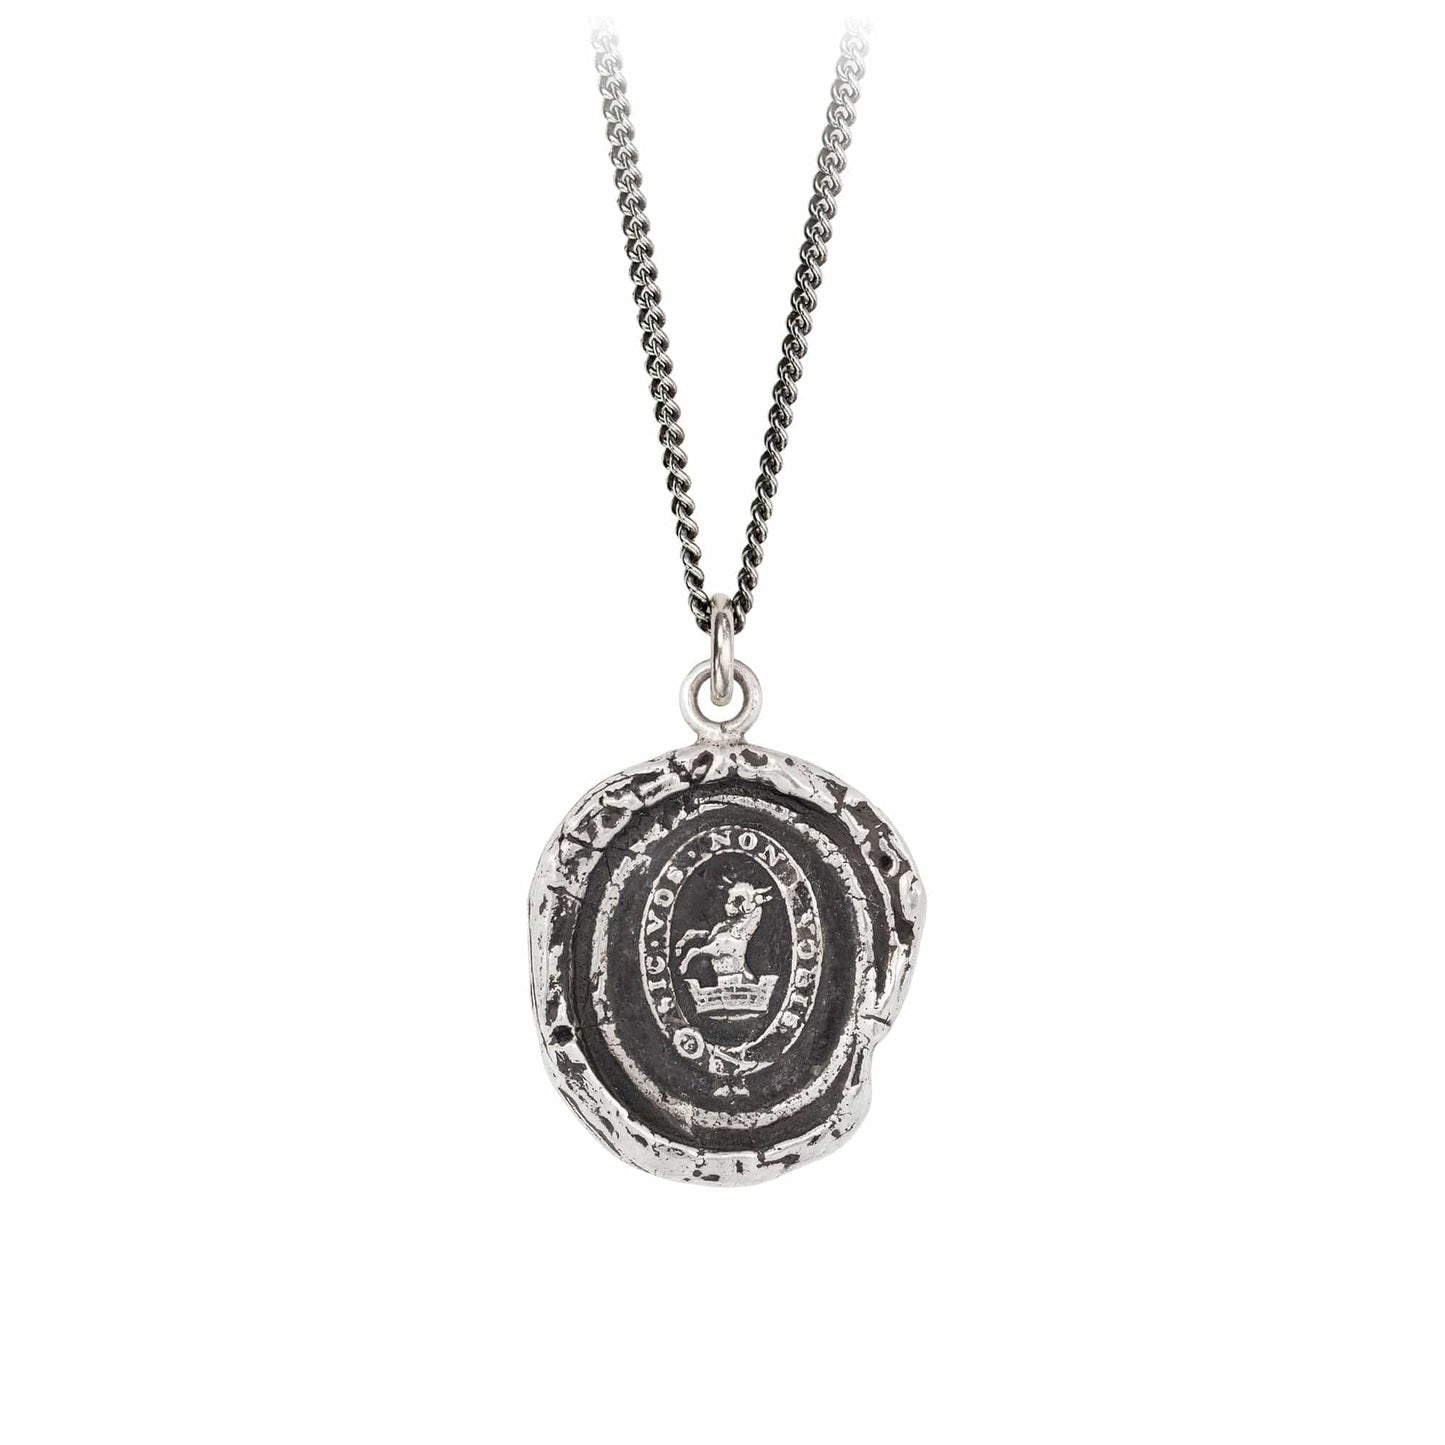 NKL Devoted Father Talisman Necklace